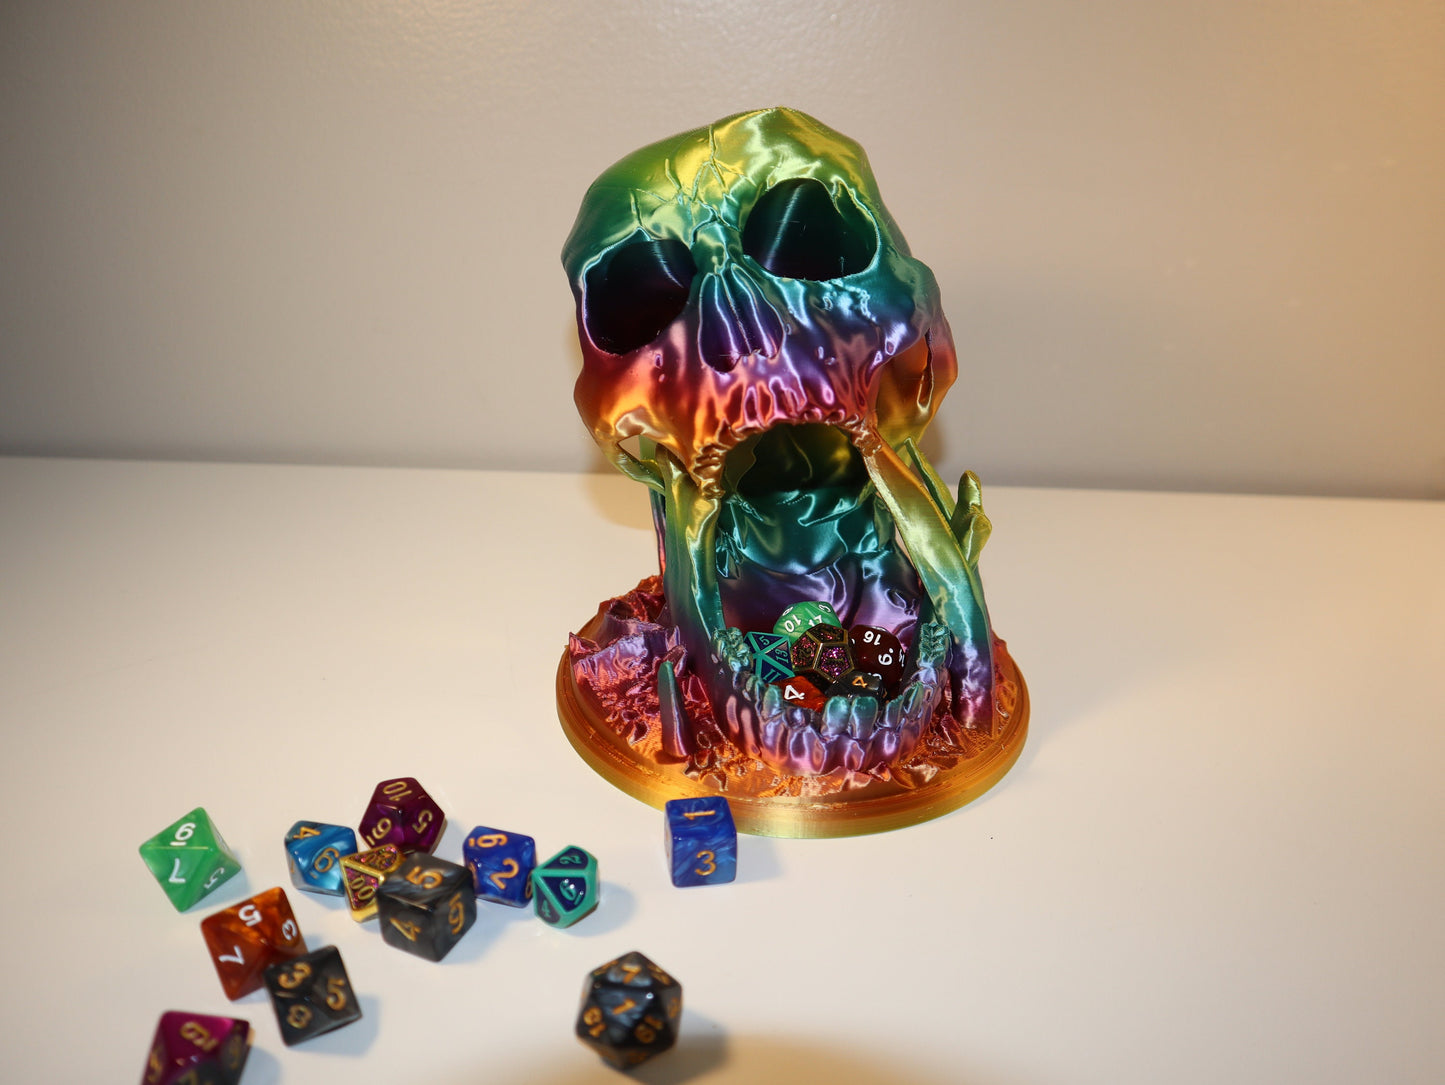 Desert Kiss Skull Dice Tower, Tabletop Fantasy Role Play RPG Gaming Cosplay Props - Dungeons and Dragons DnD D&D